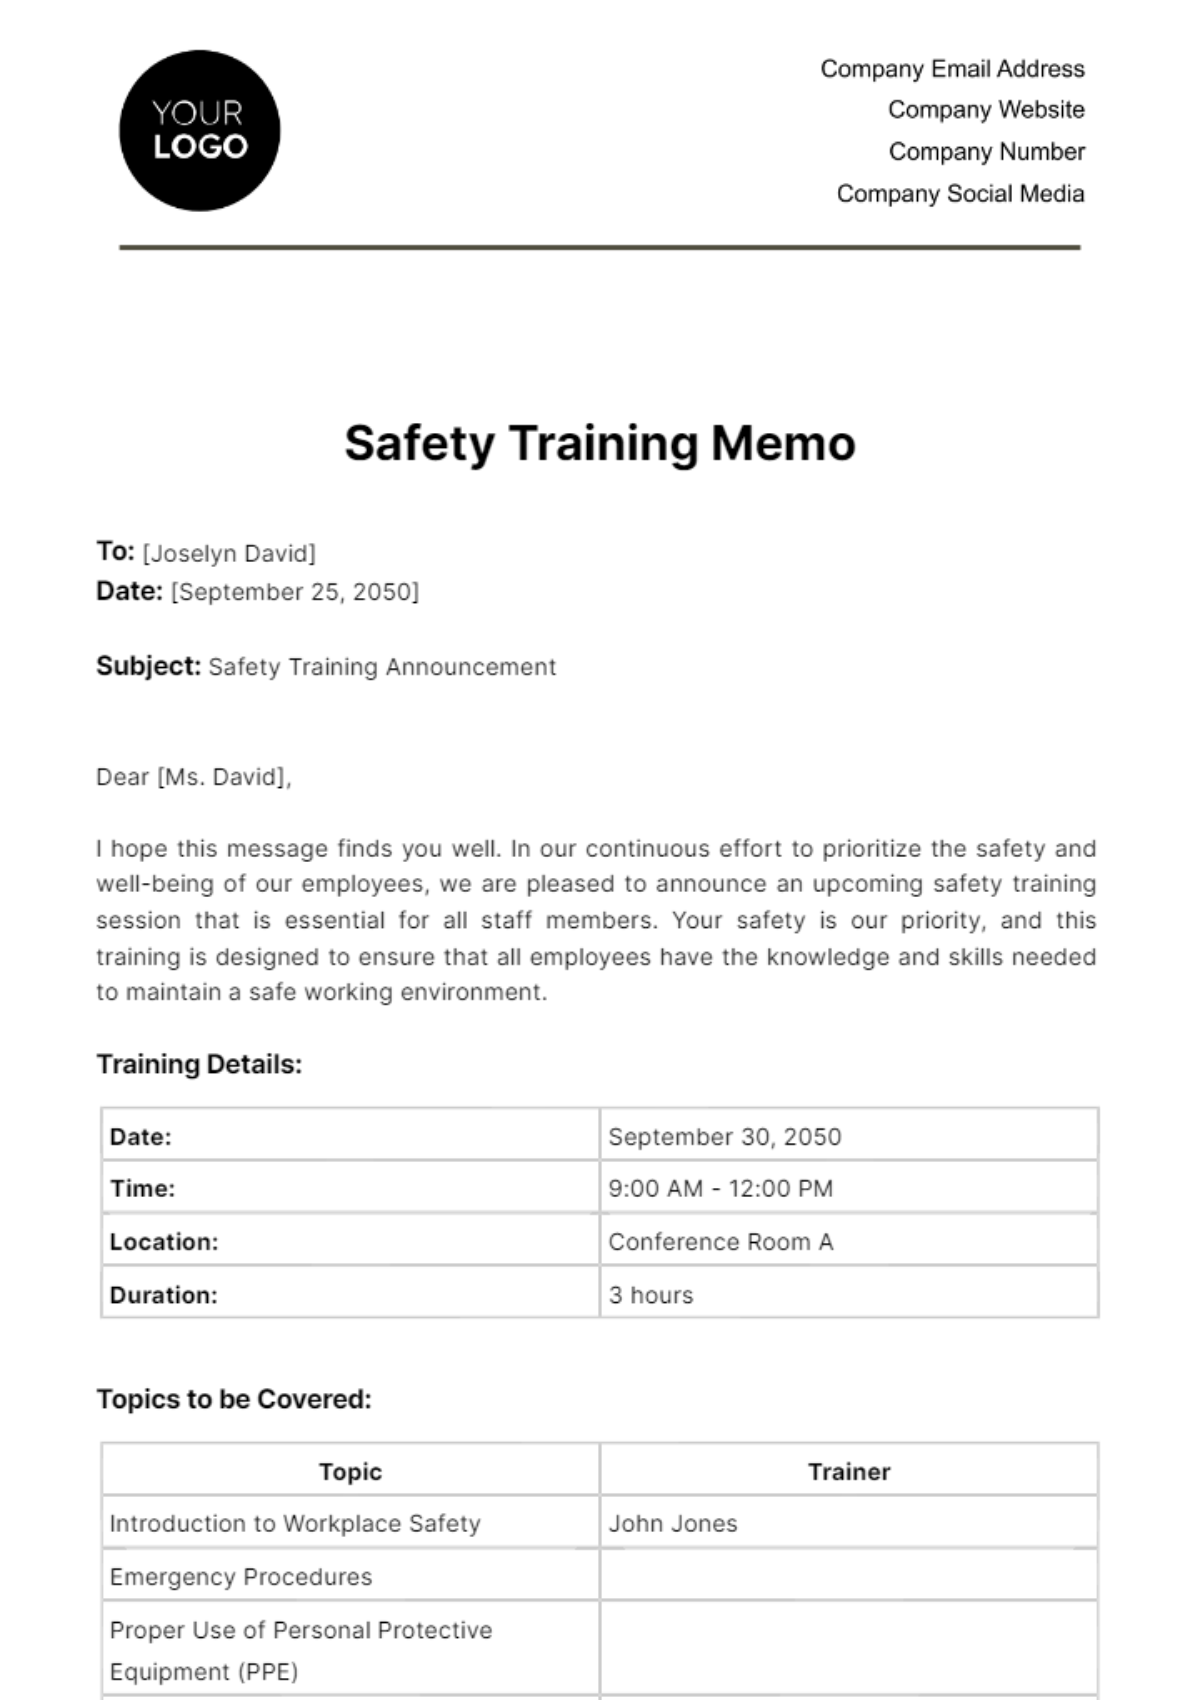 Free Safety Training Memo HR Template